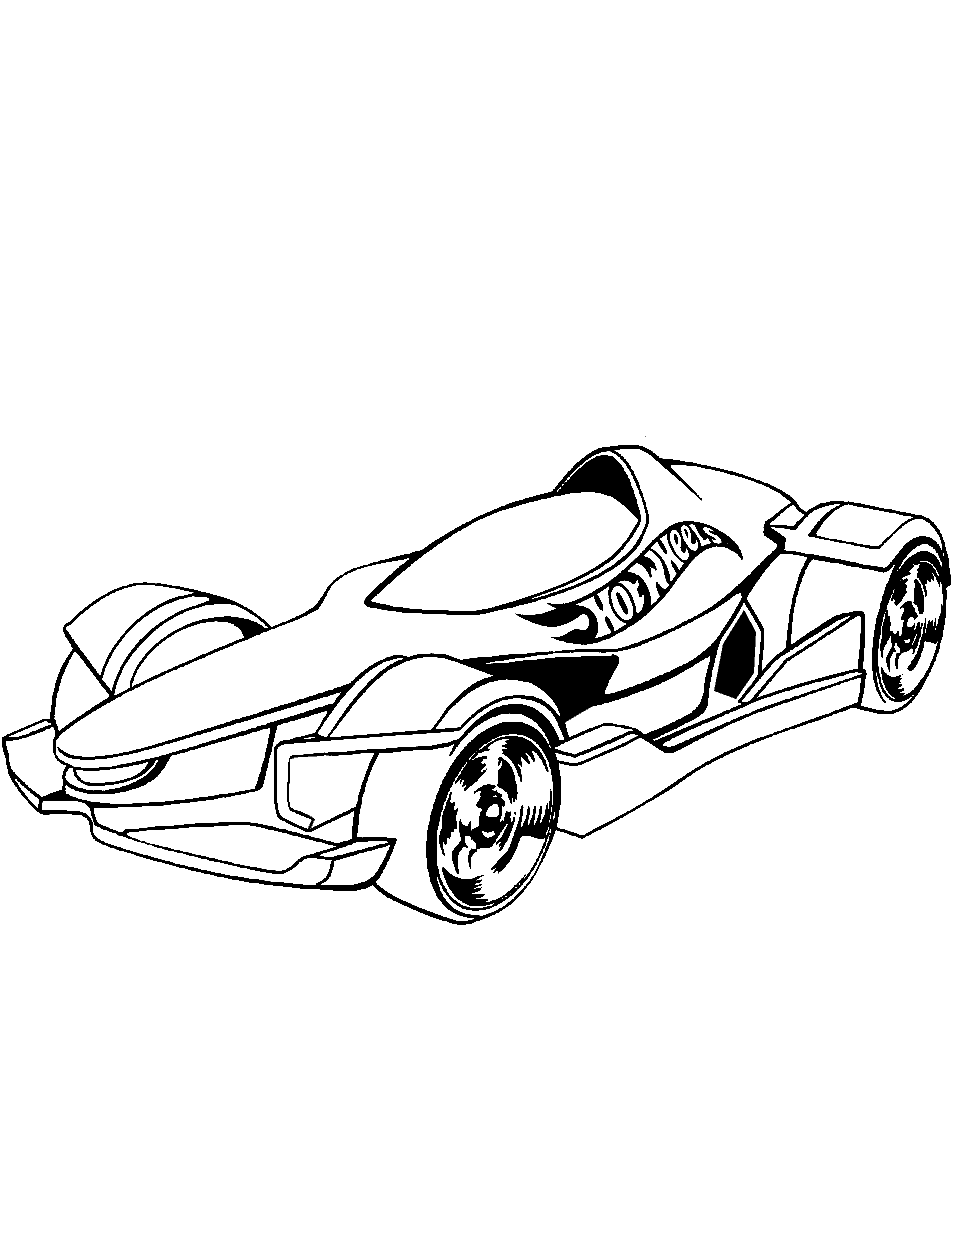 Race car coloring pages free printable sheets